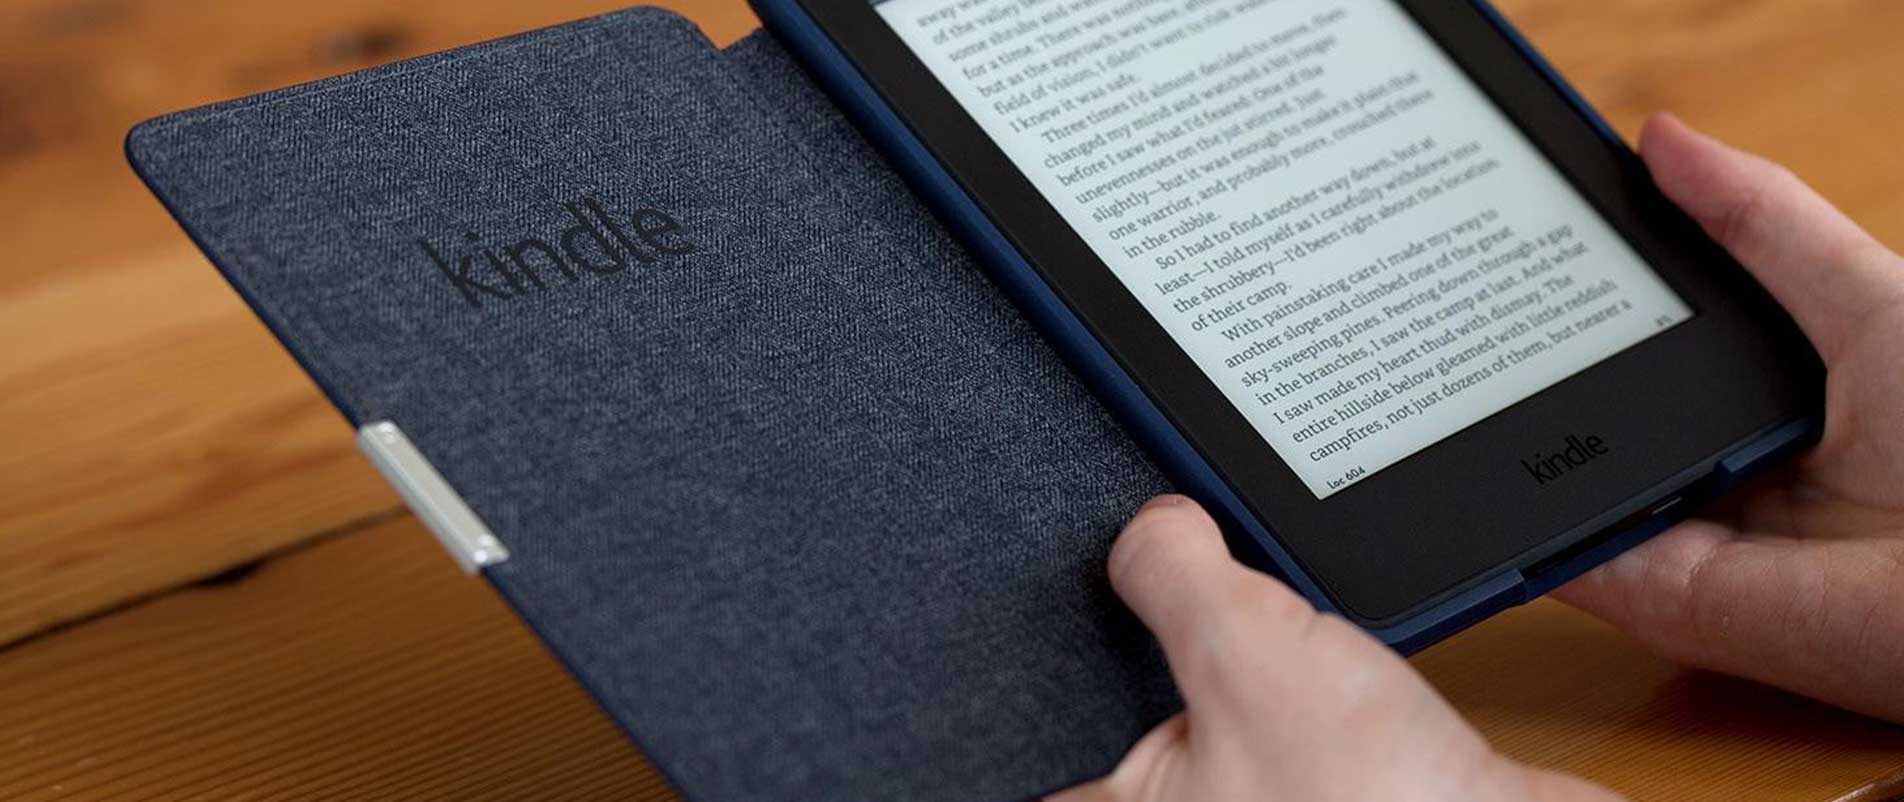 How Do I Download Mobi Files To My Kindle